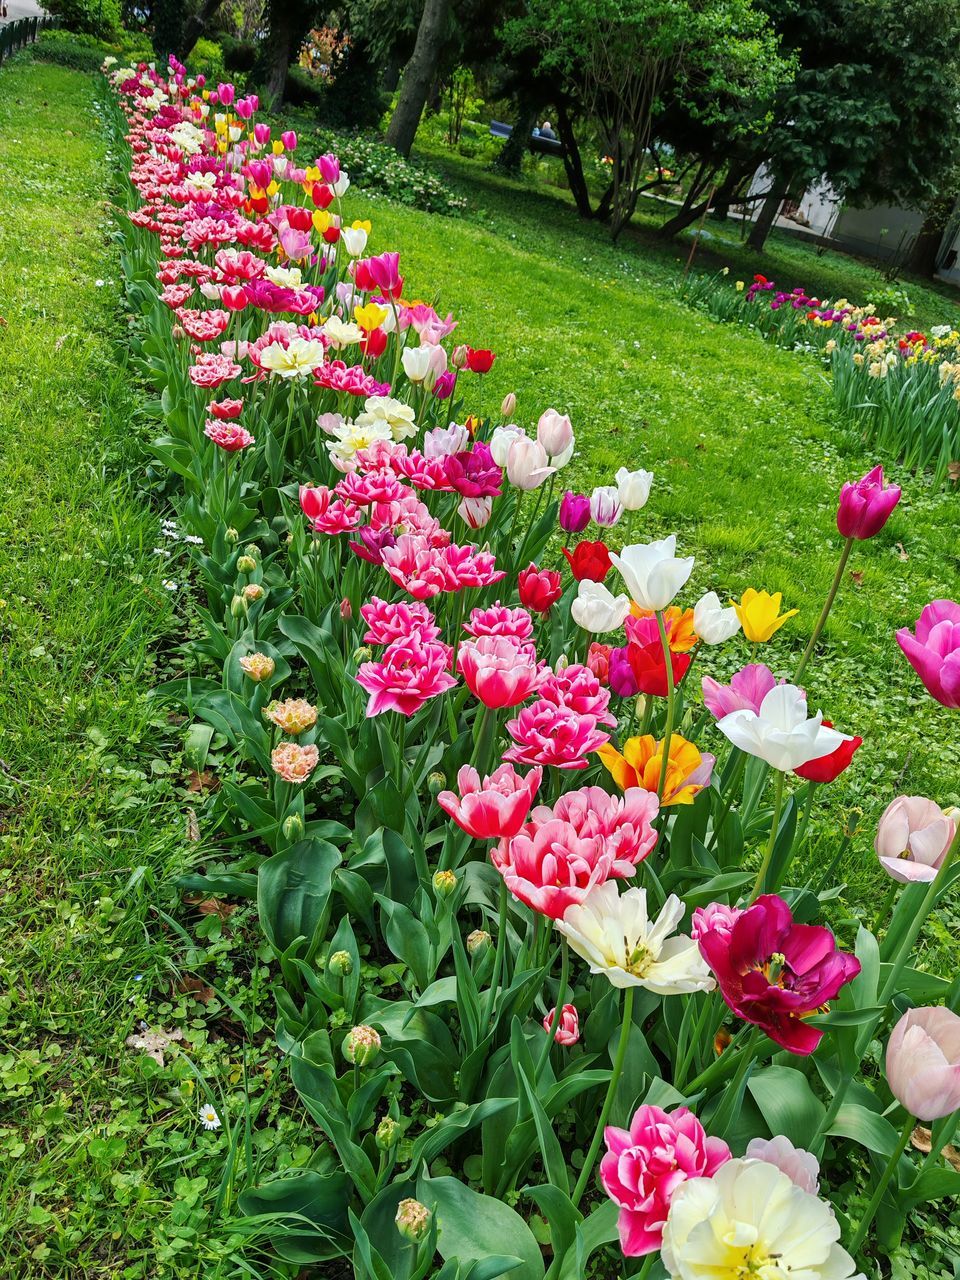 plant, flower, flowering plant, beauty in nature, freshness, growth, nature, fragility, garden, green, pink, grass, day, no people, lawn, park, petal, flower head, park - man made space, inflorescence, field, multi colored, high angle view, land, outdoors, meadow, flowerbed, springtime, close-up, botany, tranquility, variation, sunlight, front or back yard, plant part